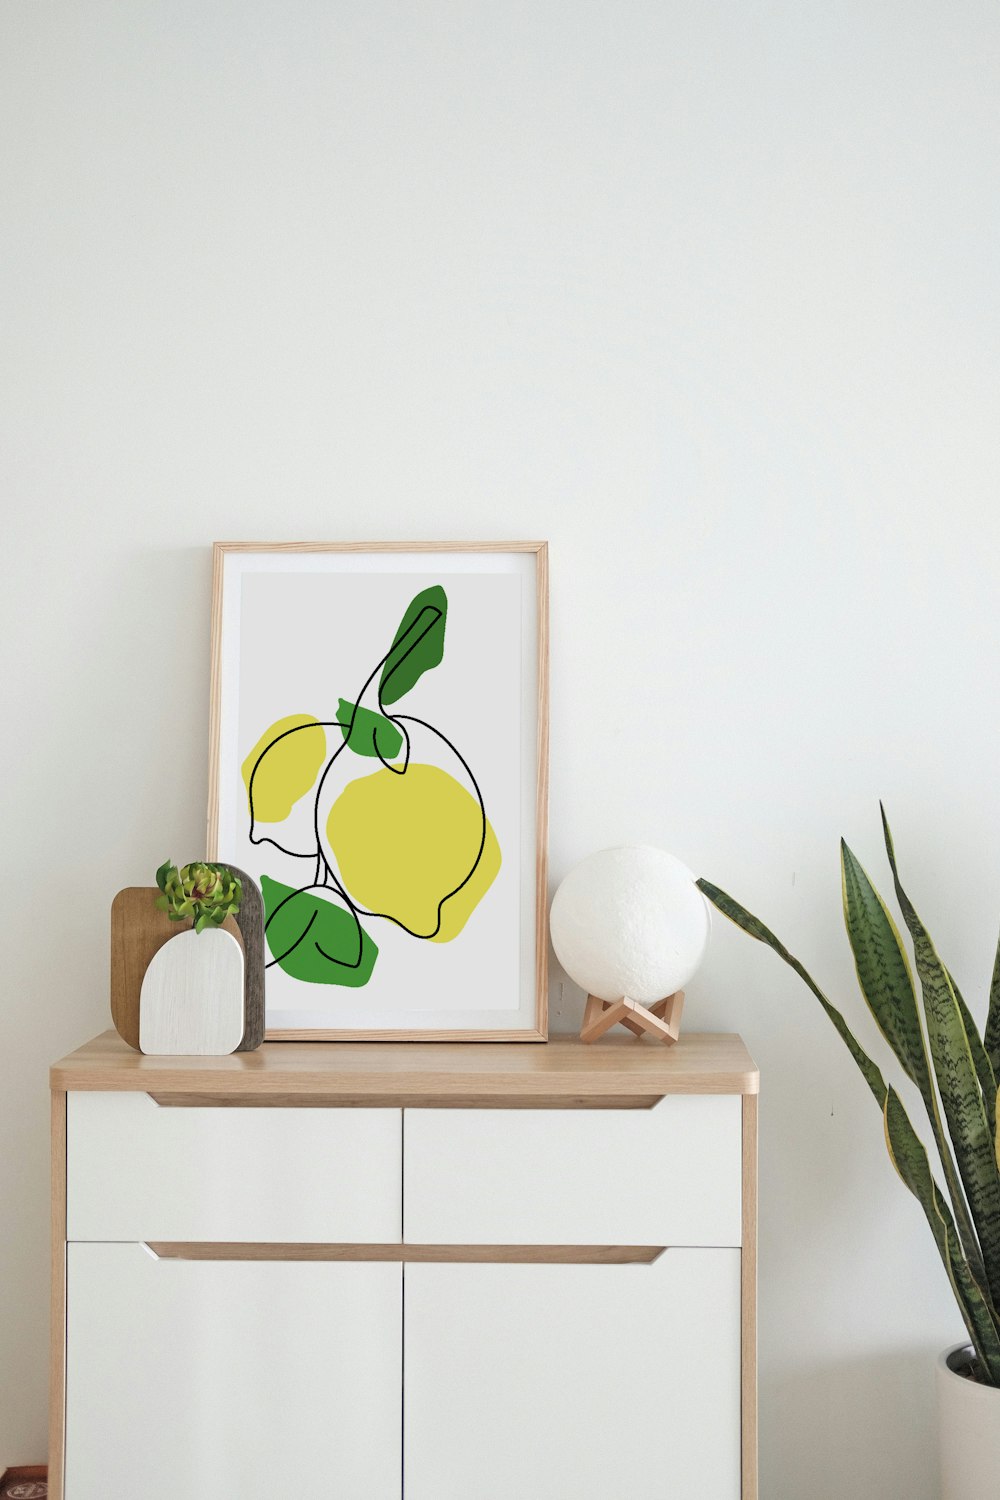 a picture of a lemon on a shelf next to a potted plant